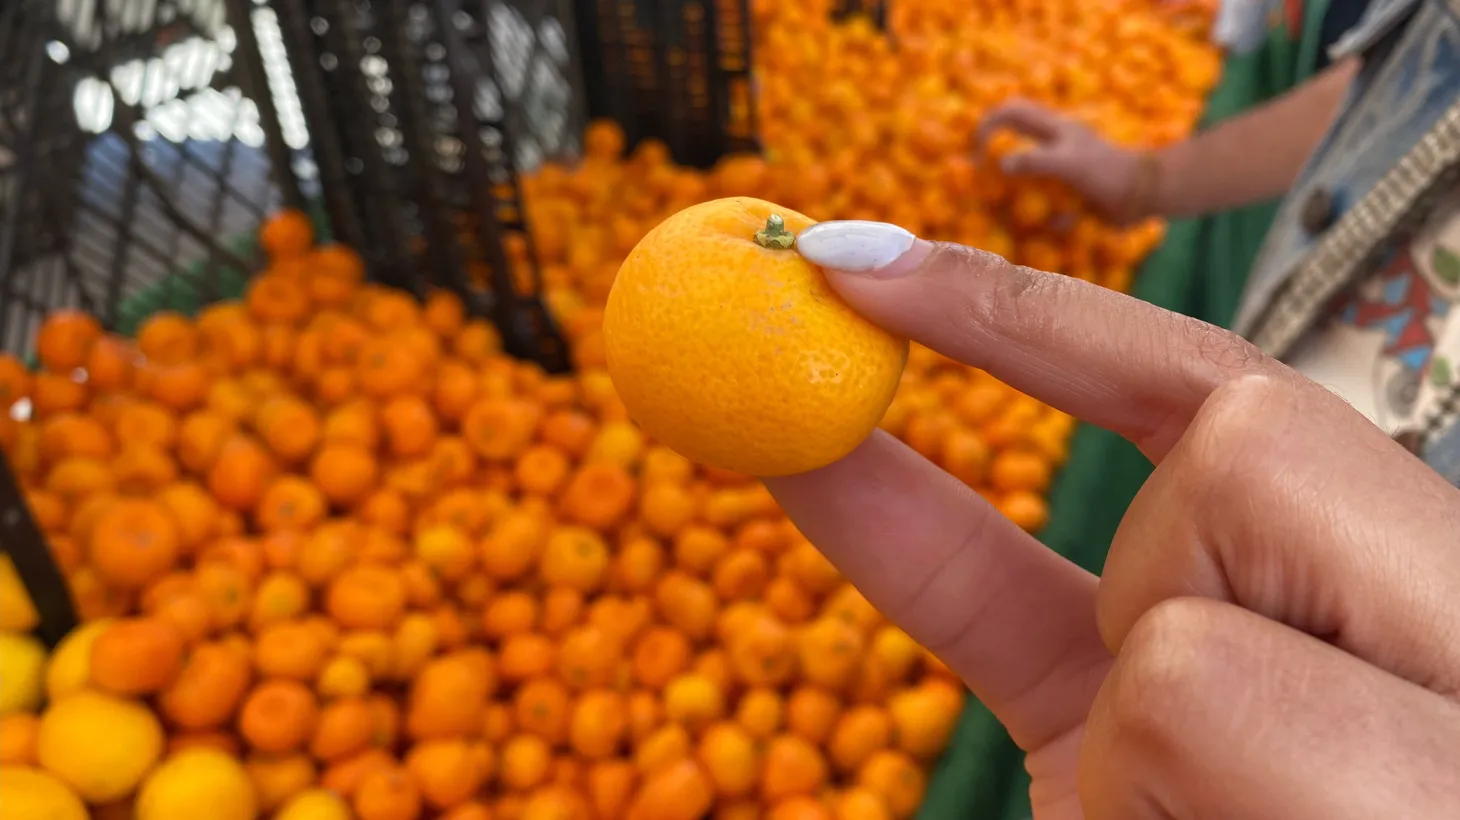 The kishu mandarin at Garcia Organic Farms are seedless and easy to peel, making it favored by chefs.